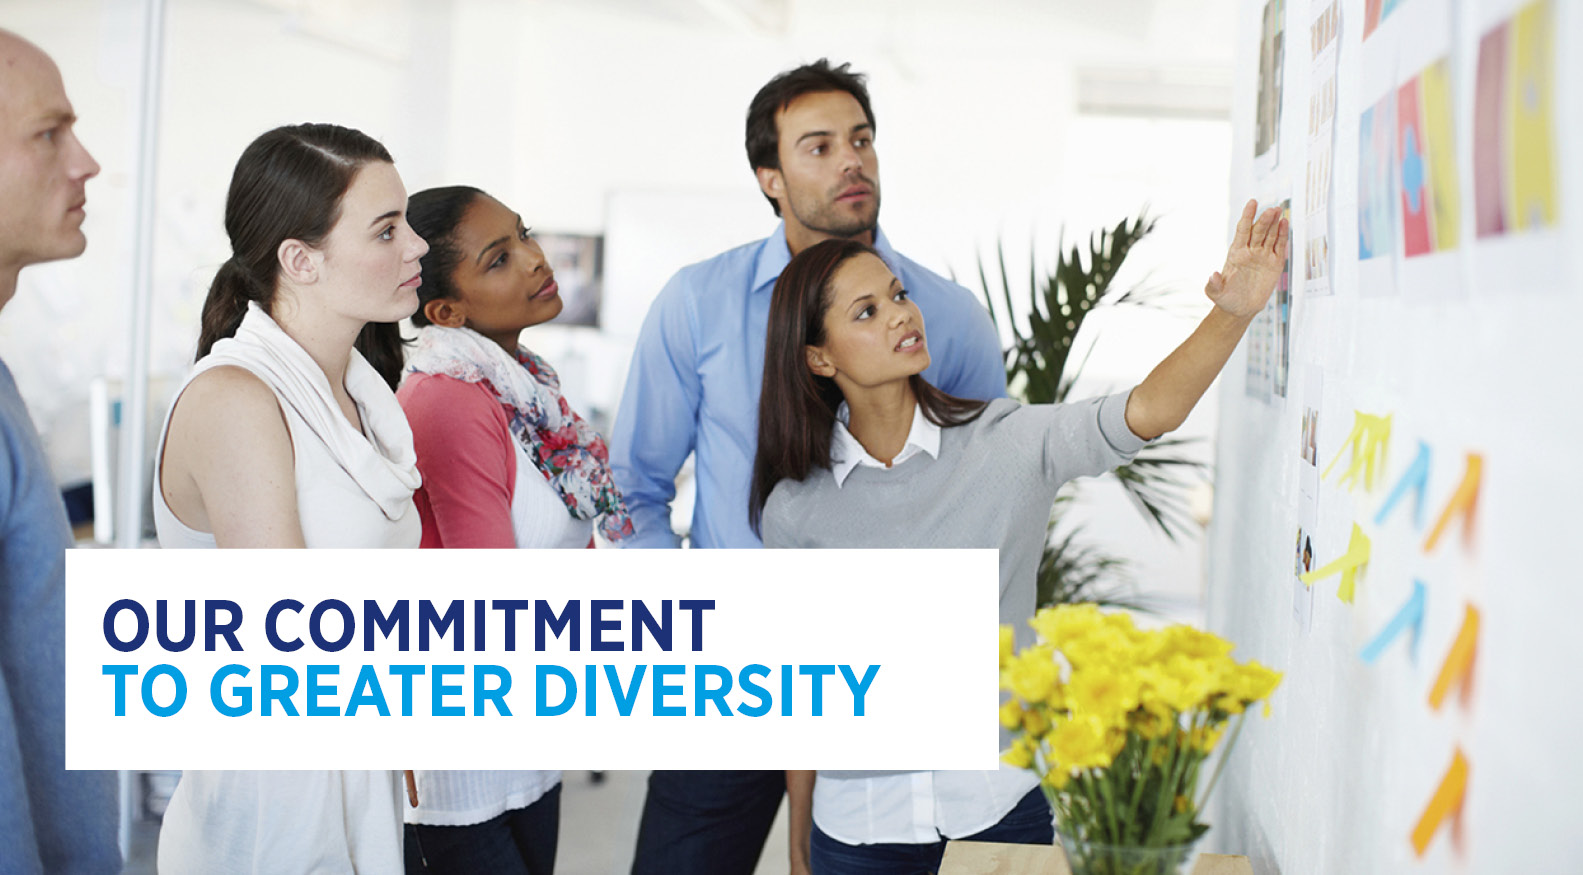 Our commitment to greater diversity